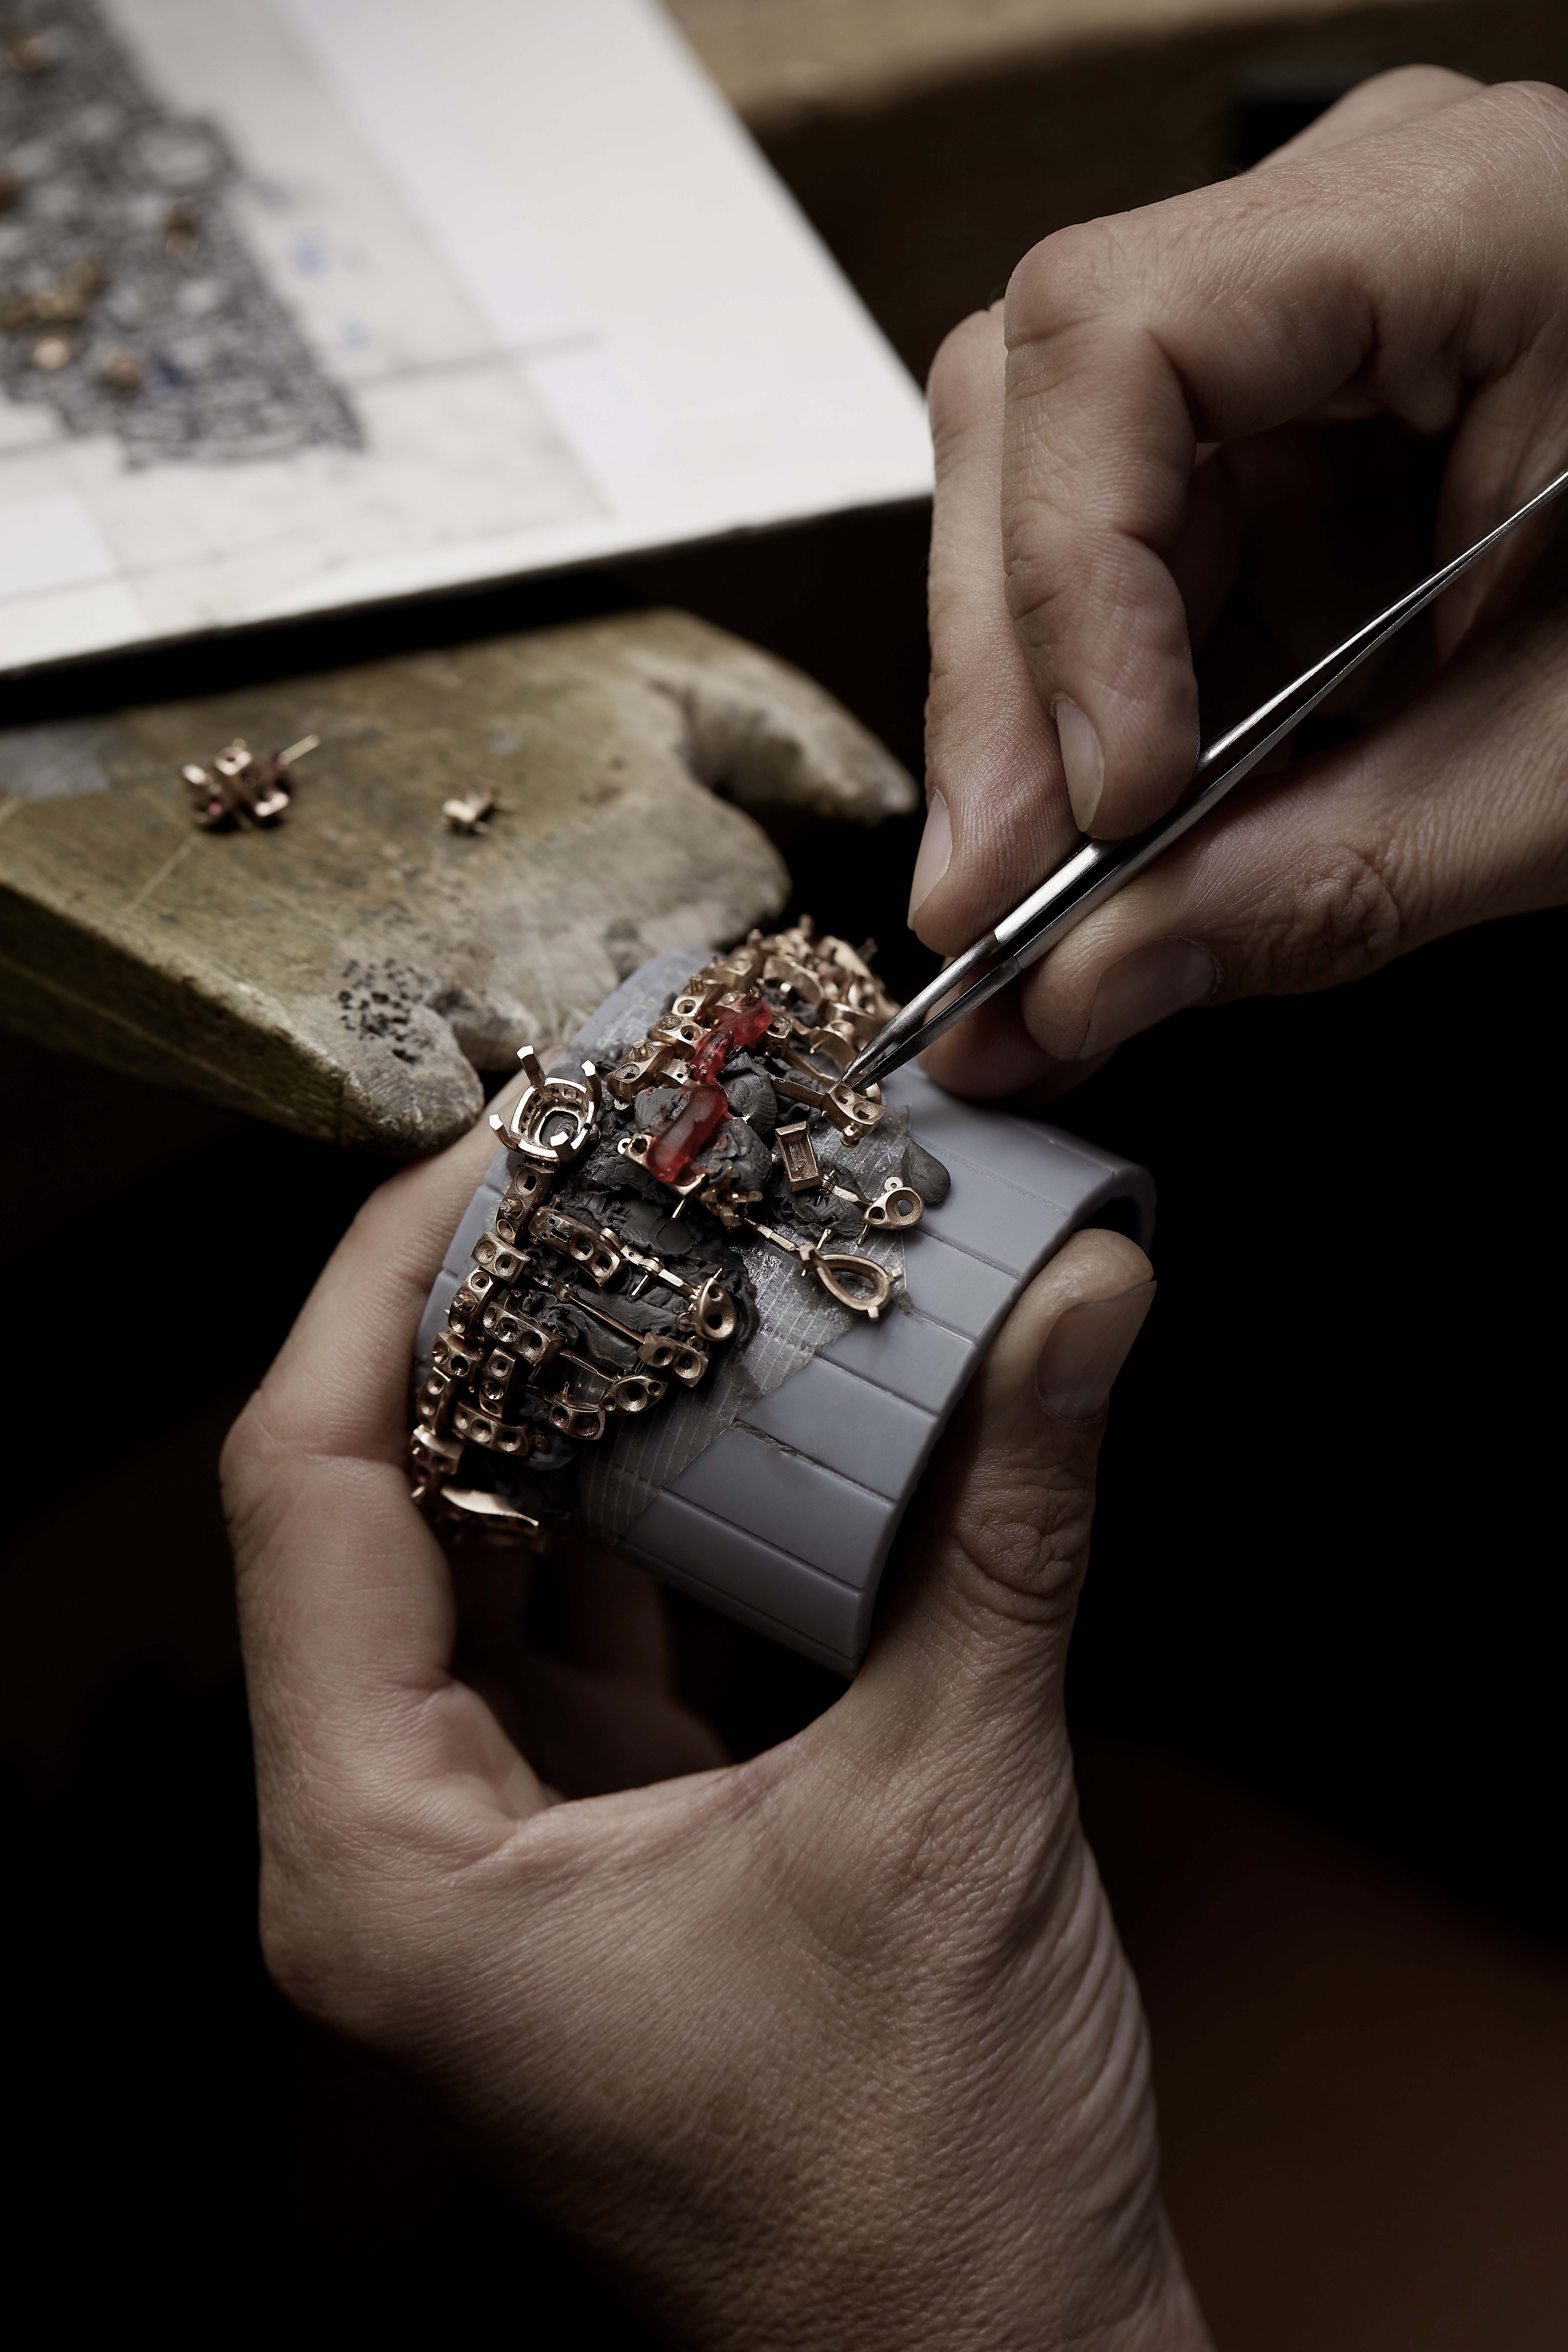 The charming story behind Chanel's high-jewellery collection